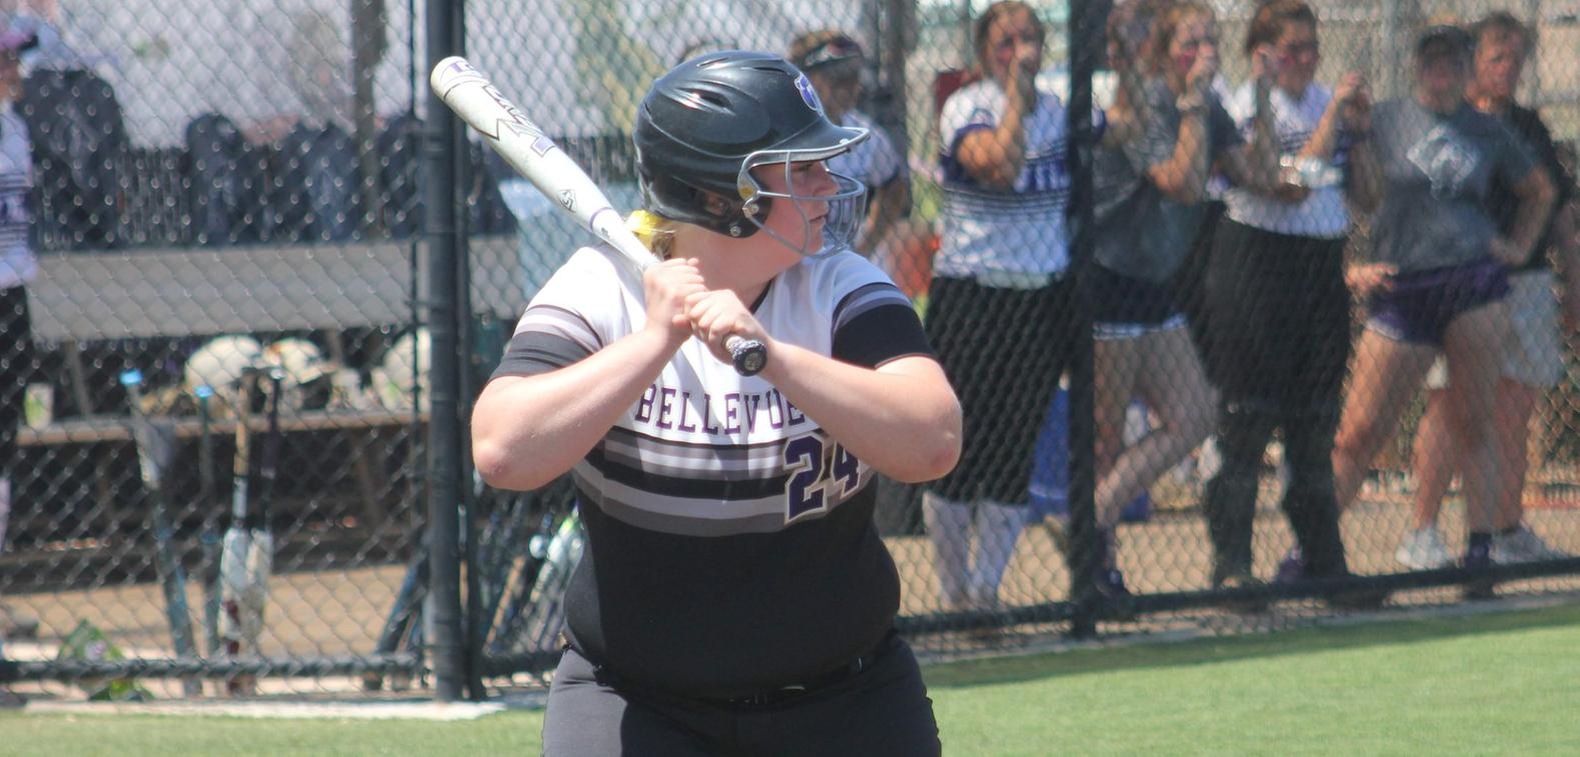 Emily Rochford laced a grand slam in the Bruins' 5-2 win over UNOH.